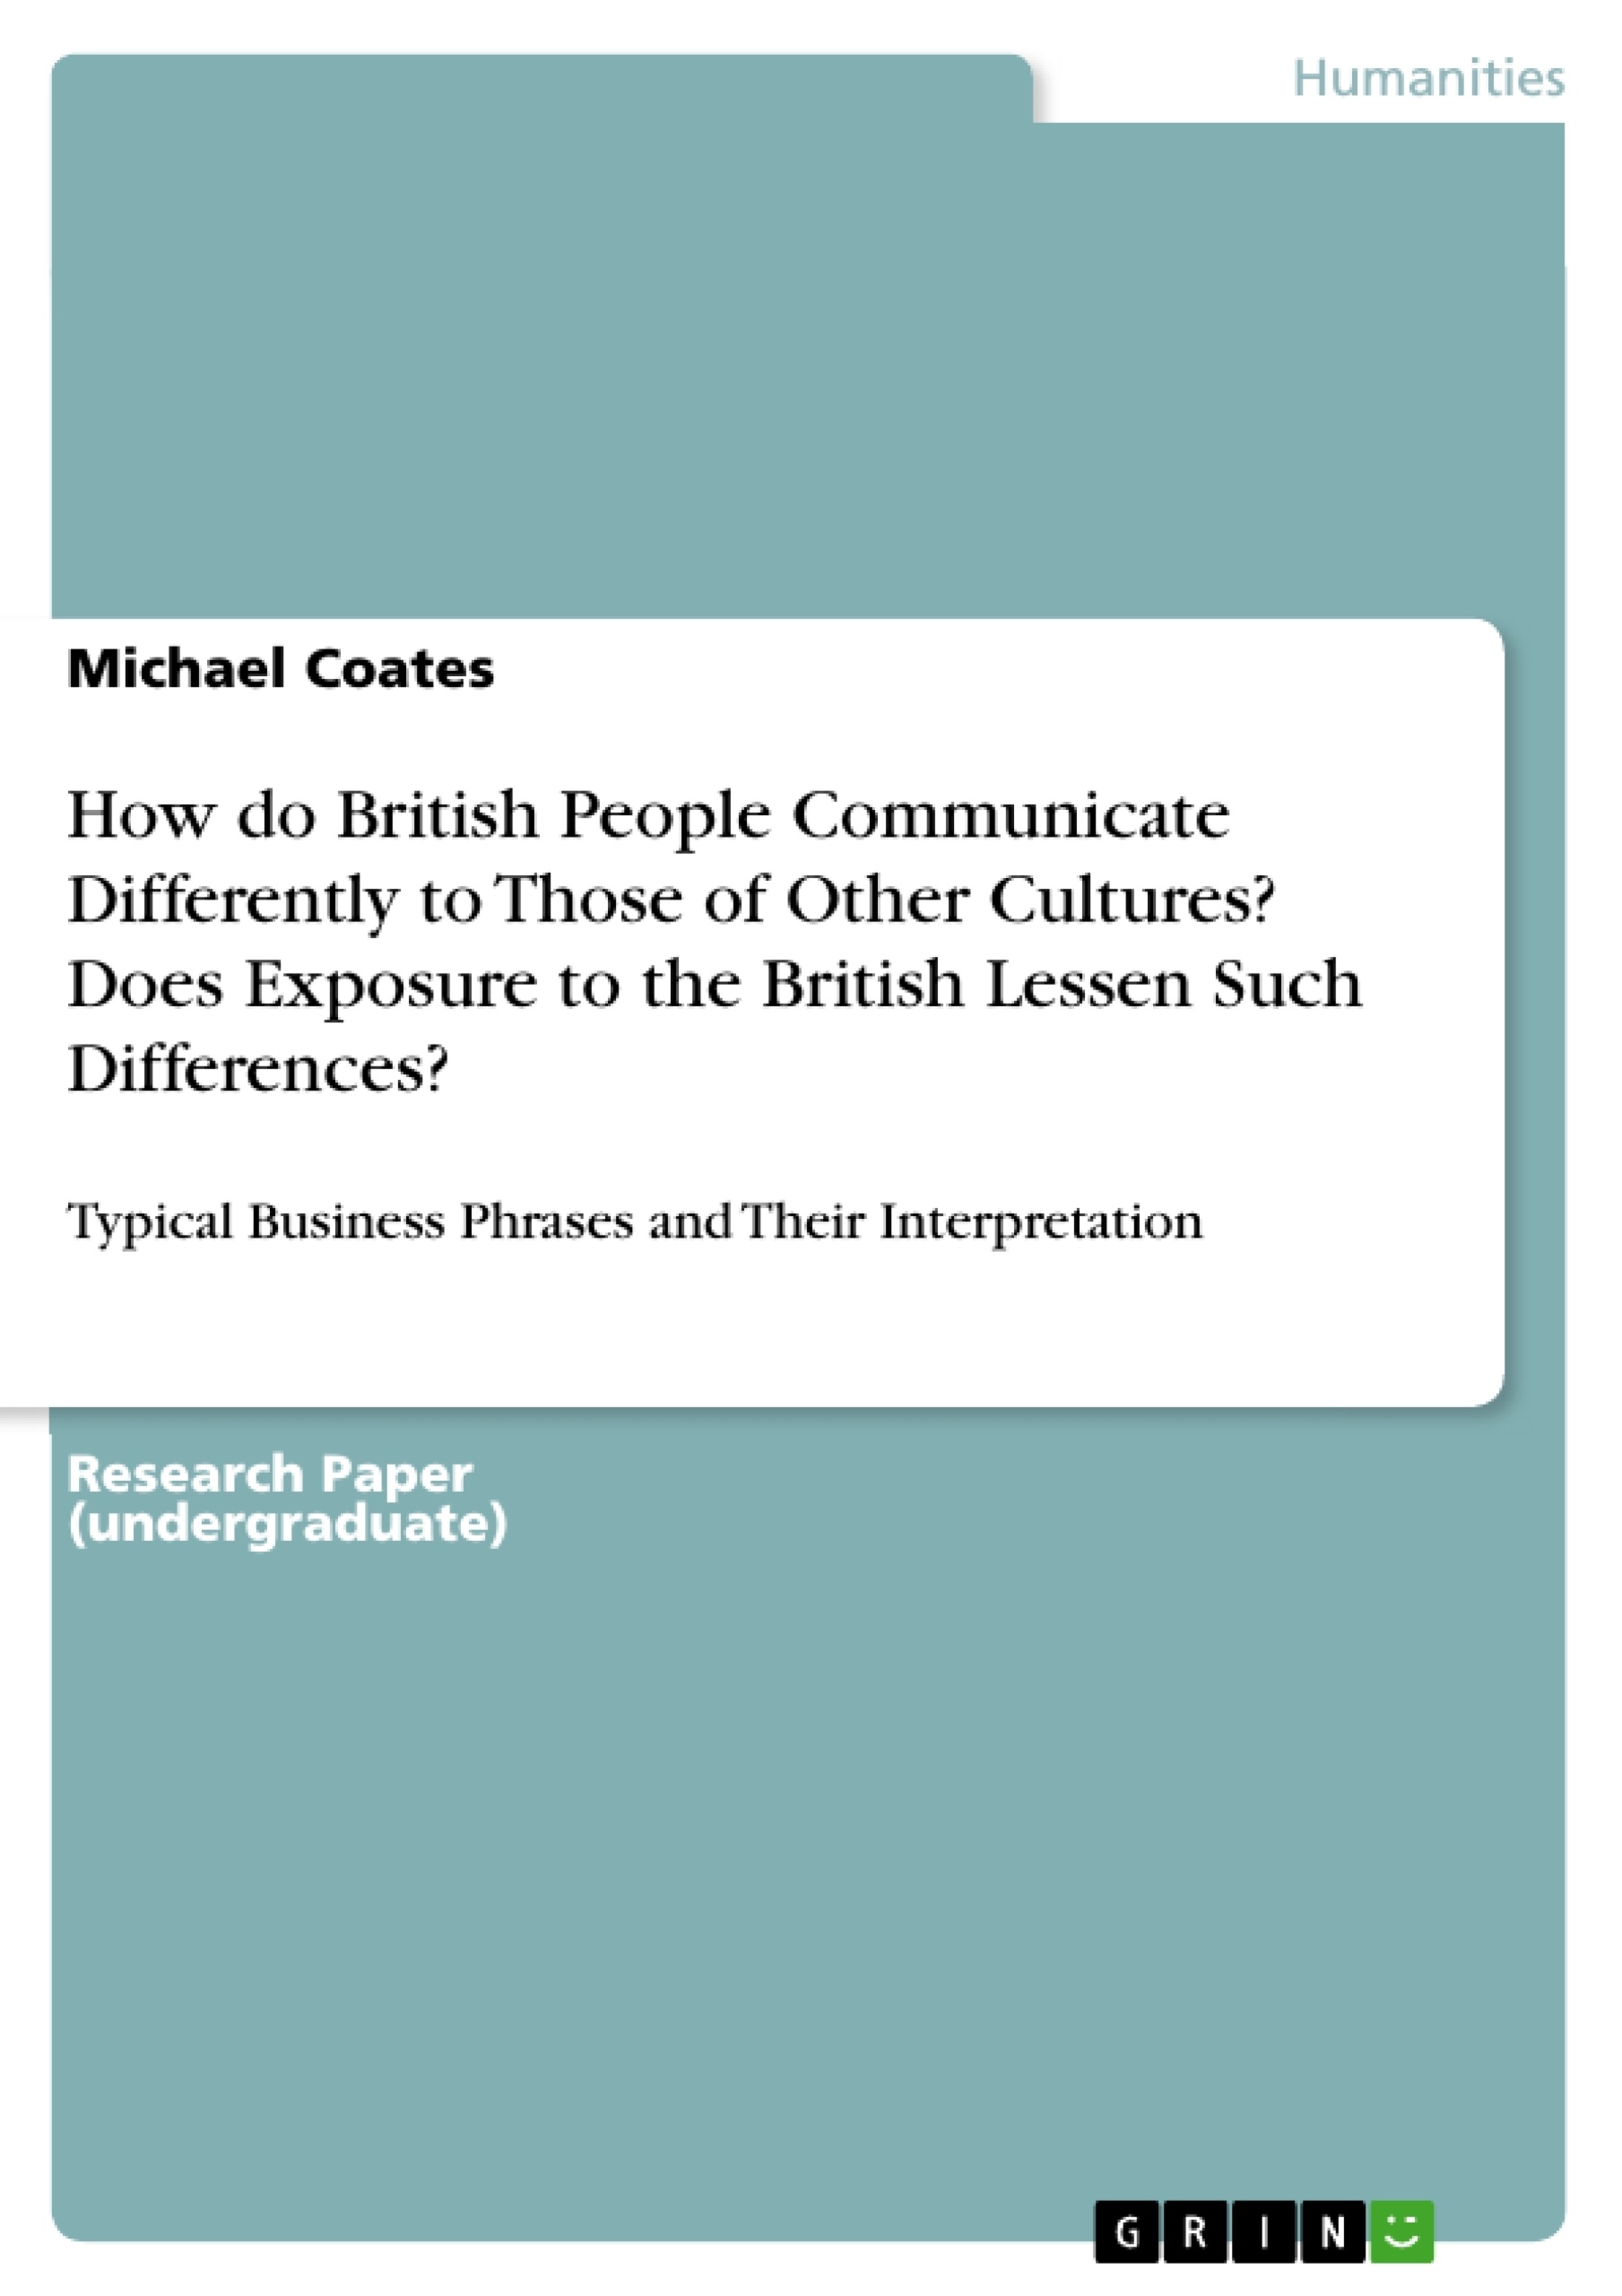 Title: How do British People Communicate Differently to Those of Other Cultures? Does Exposure to the British Lessen Such Differences?